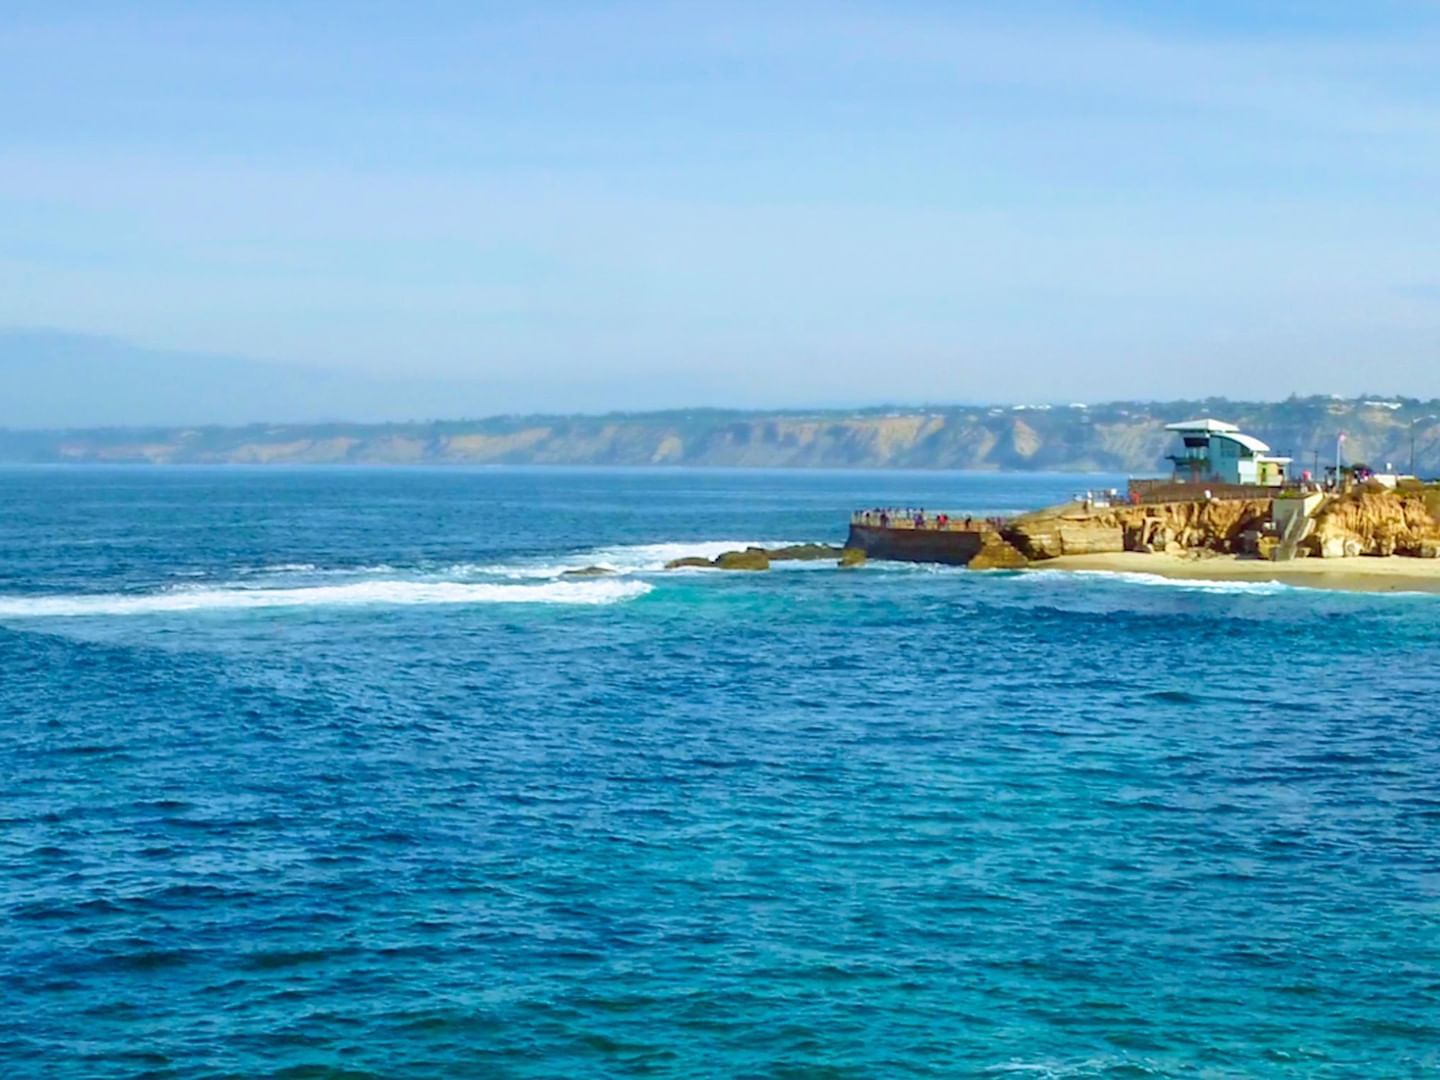 Distant view of the Hotel & Ocean, Inn by the Sea at La Jolla